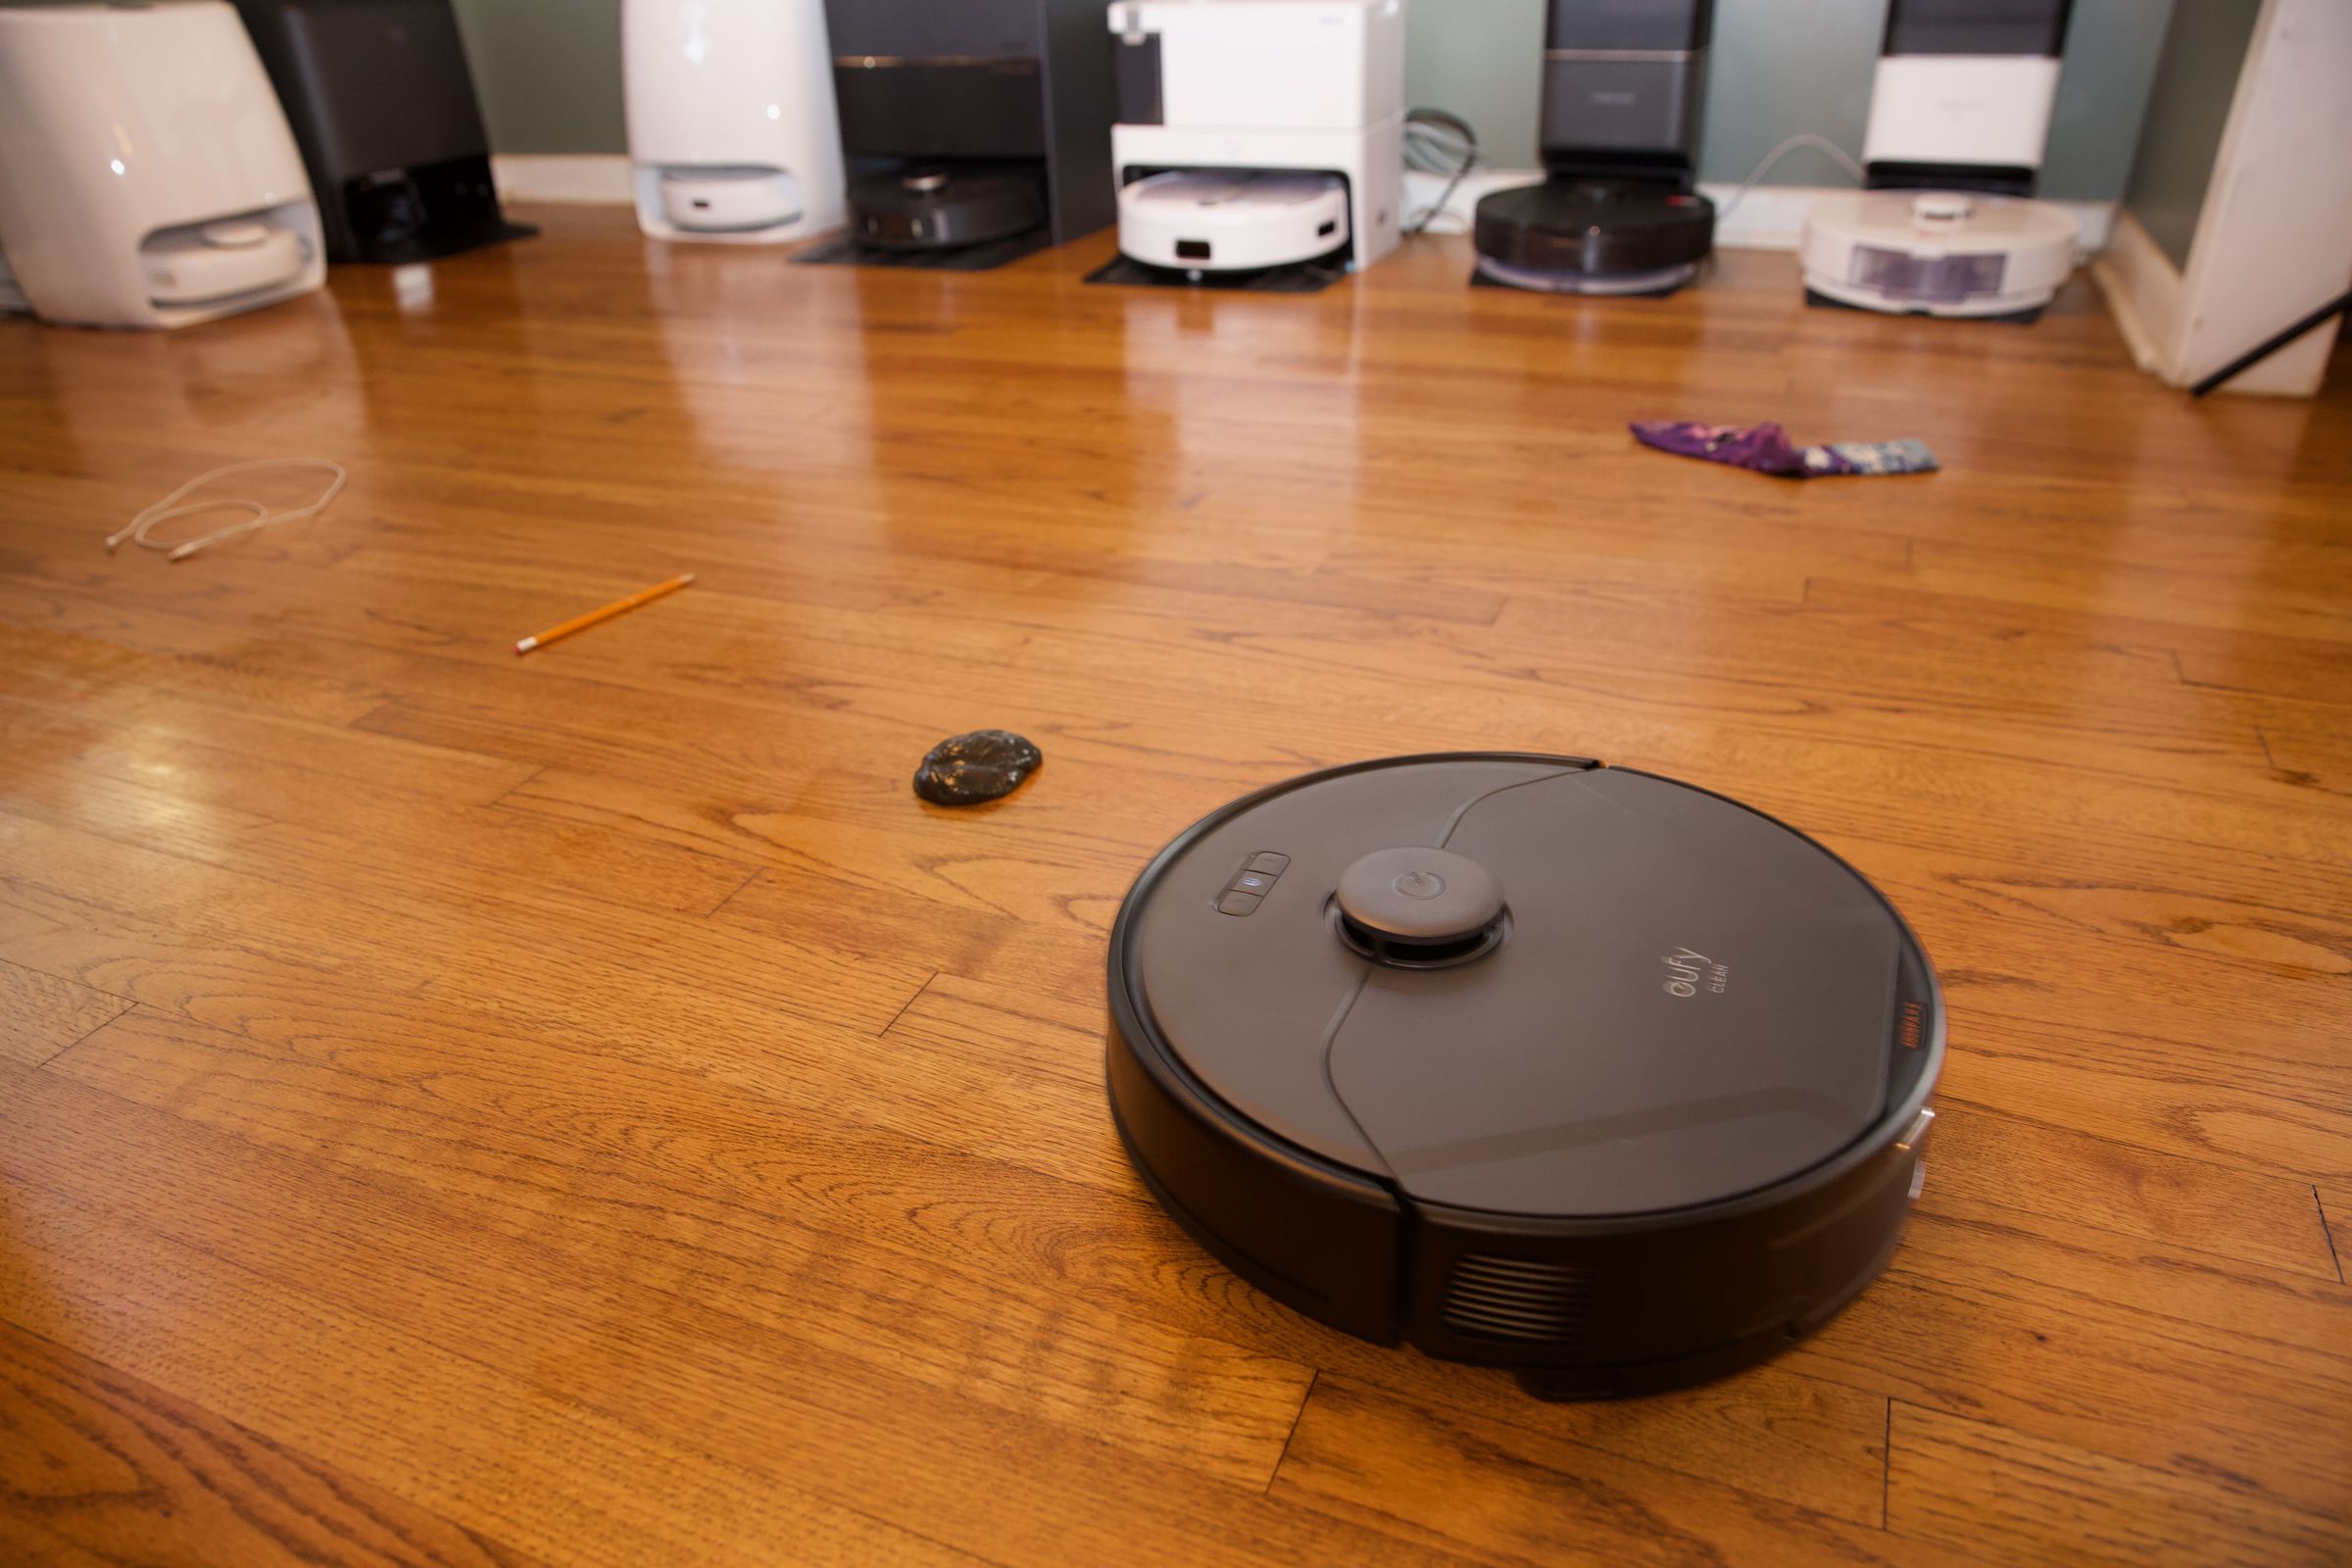 An Eufy robot vac running the gauntlet in my test lab / sitting room.